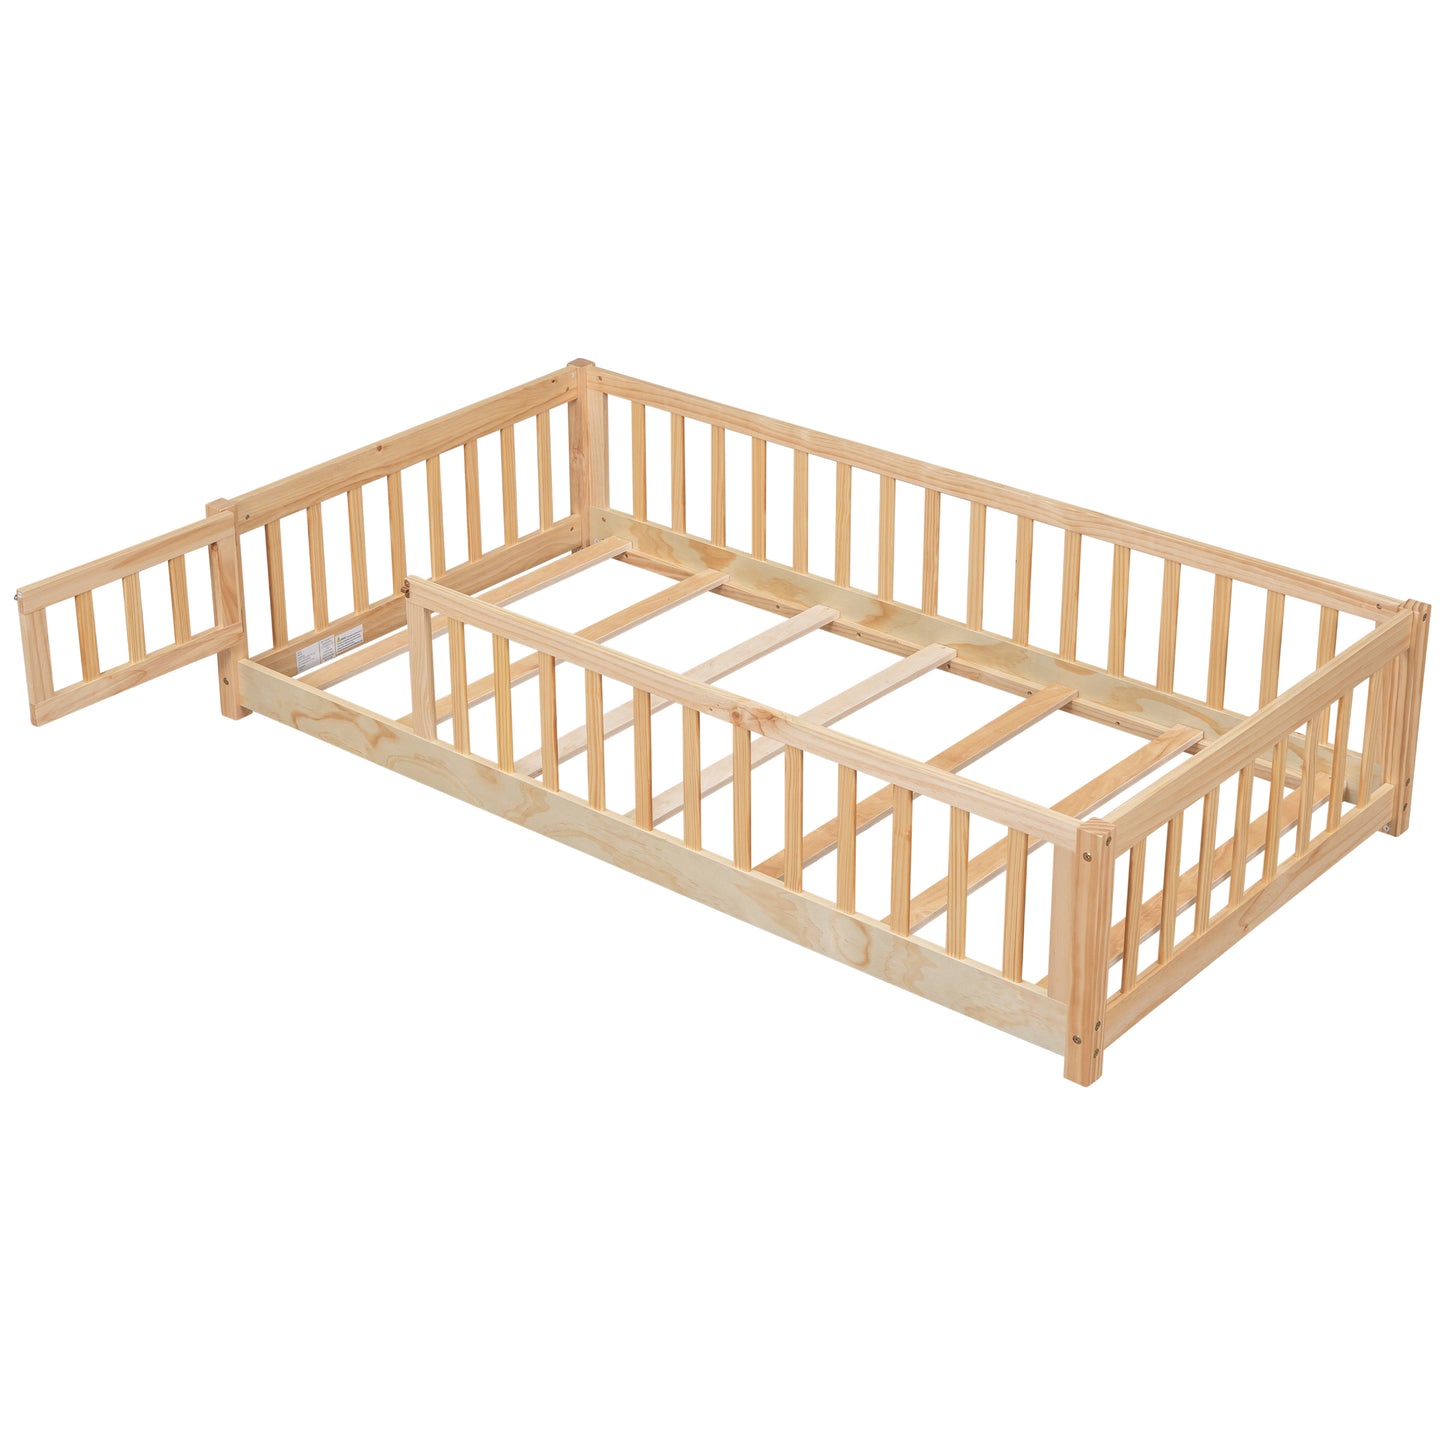 Twin Size Floor Bed for Kids, HSUNNS Twin Size Wood Toddler Floor Bed with Fence and Door, Twin Bed Montessori Floor Bed No Box Spring needed, Toddler Bed for Boys Girls, Slats Support, Gray